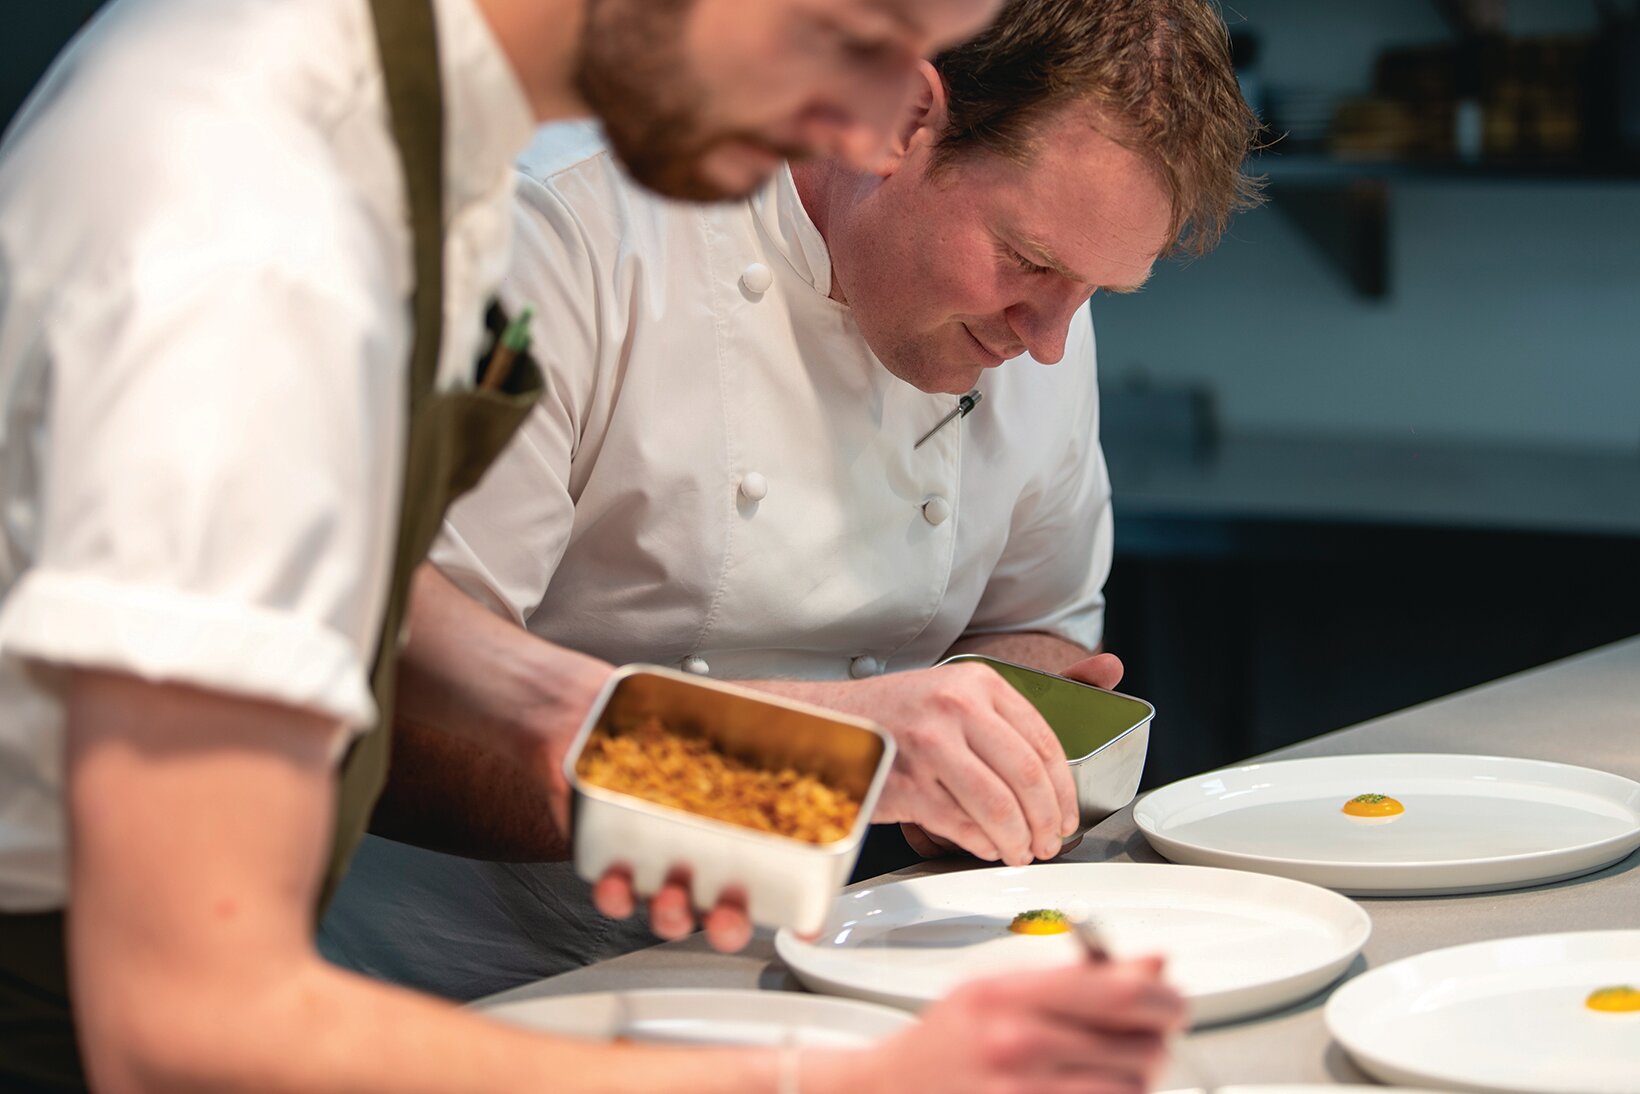 Àclèaf's head chef goes from Acorn Award to Michelin star